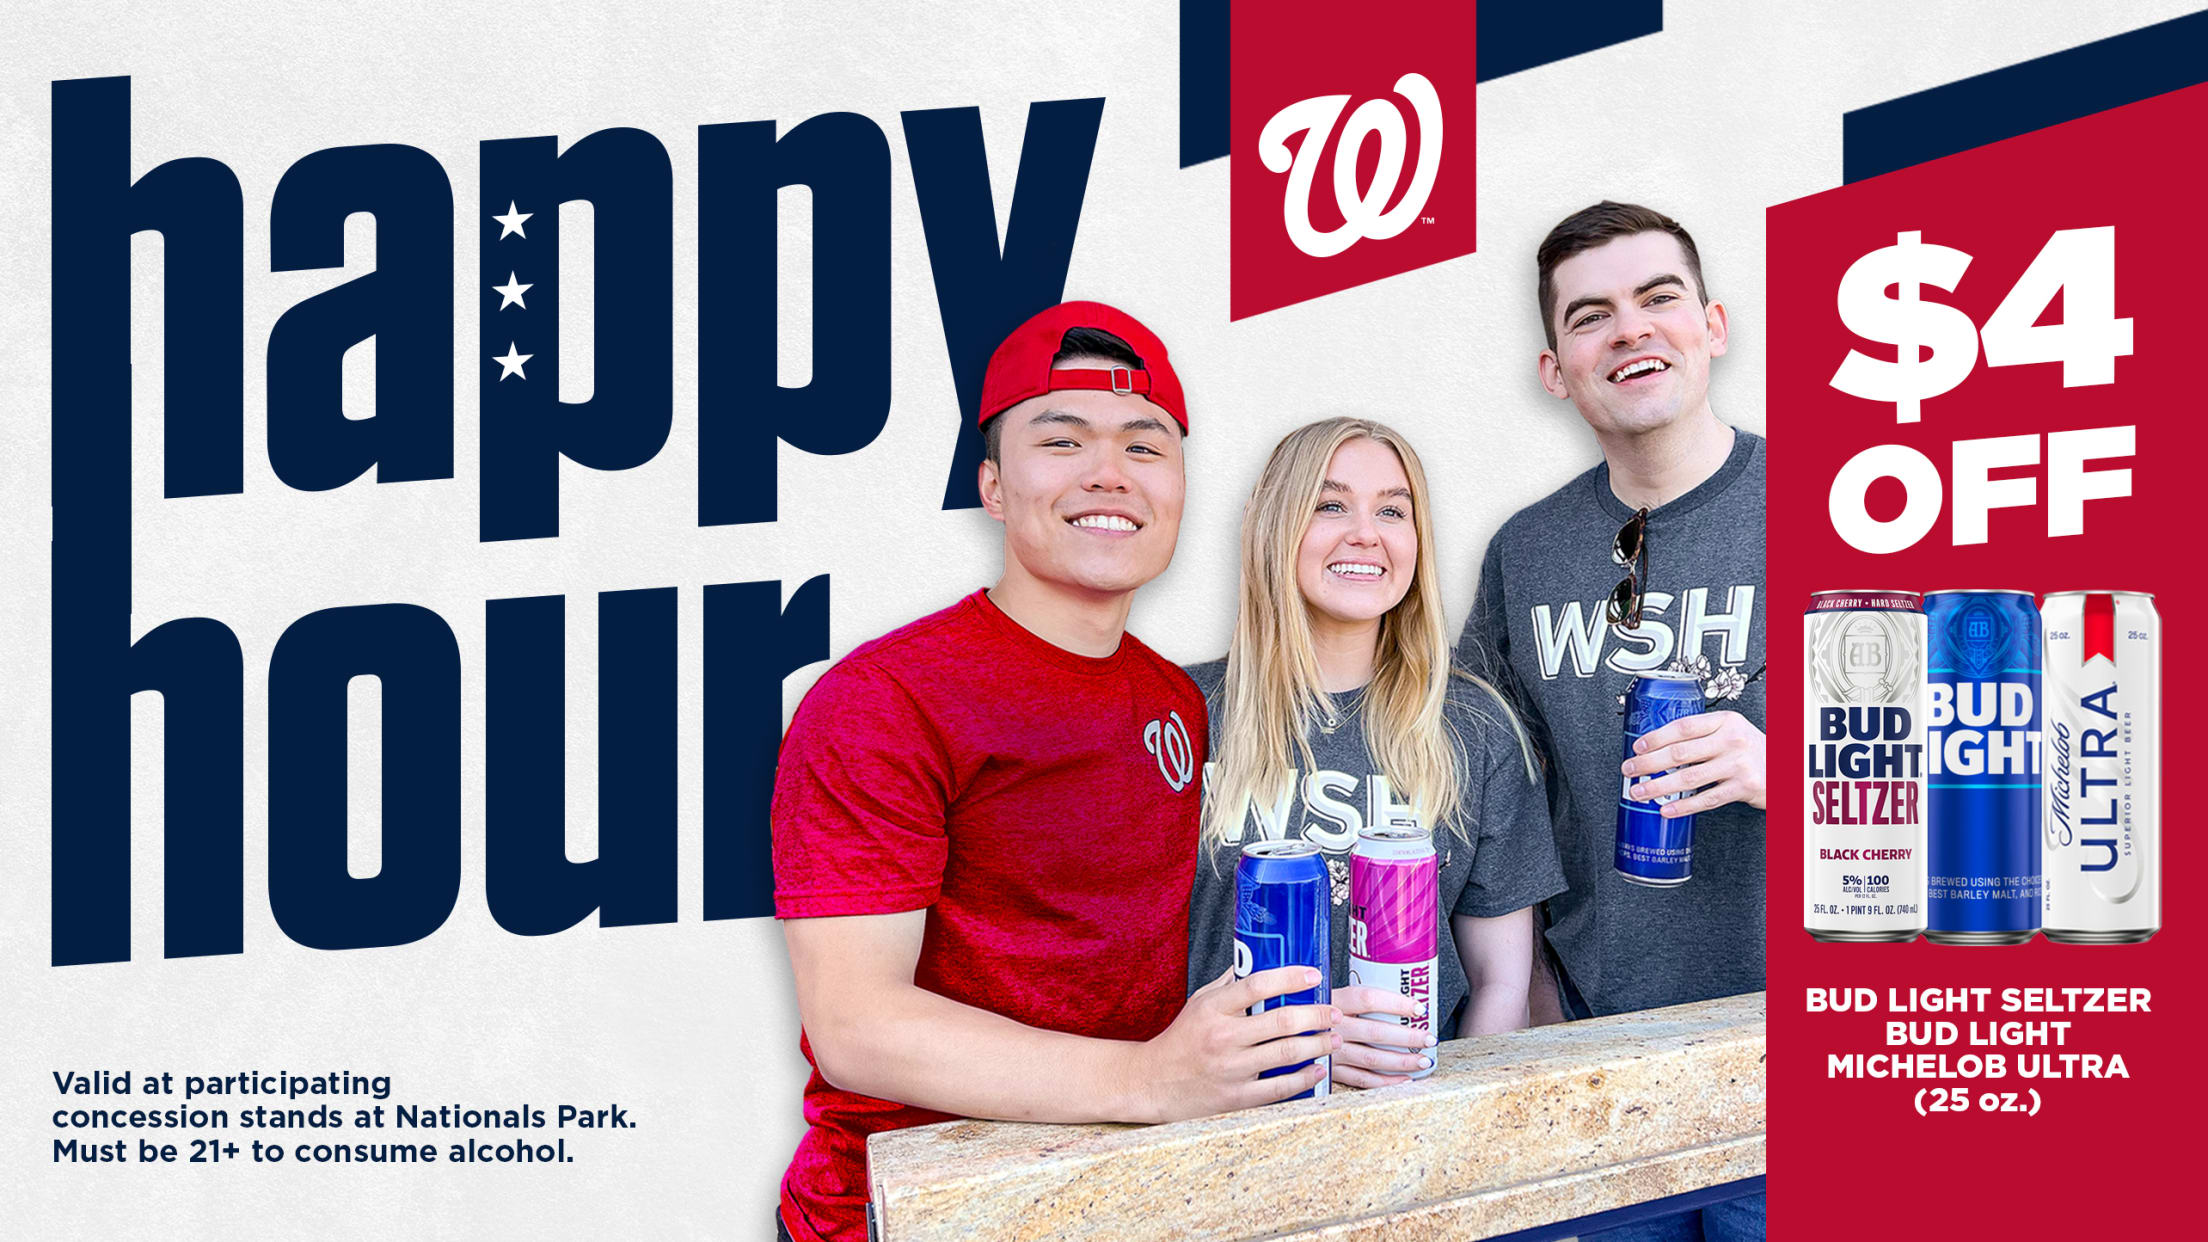 Washington Nationals fans get ready for Opening Day